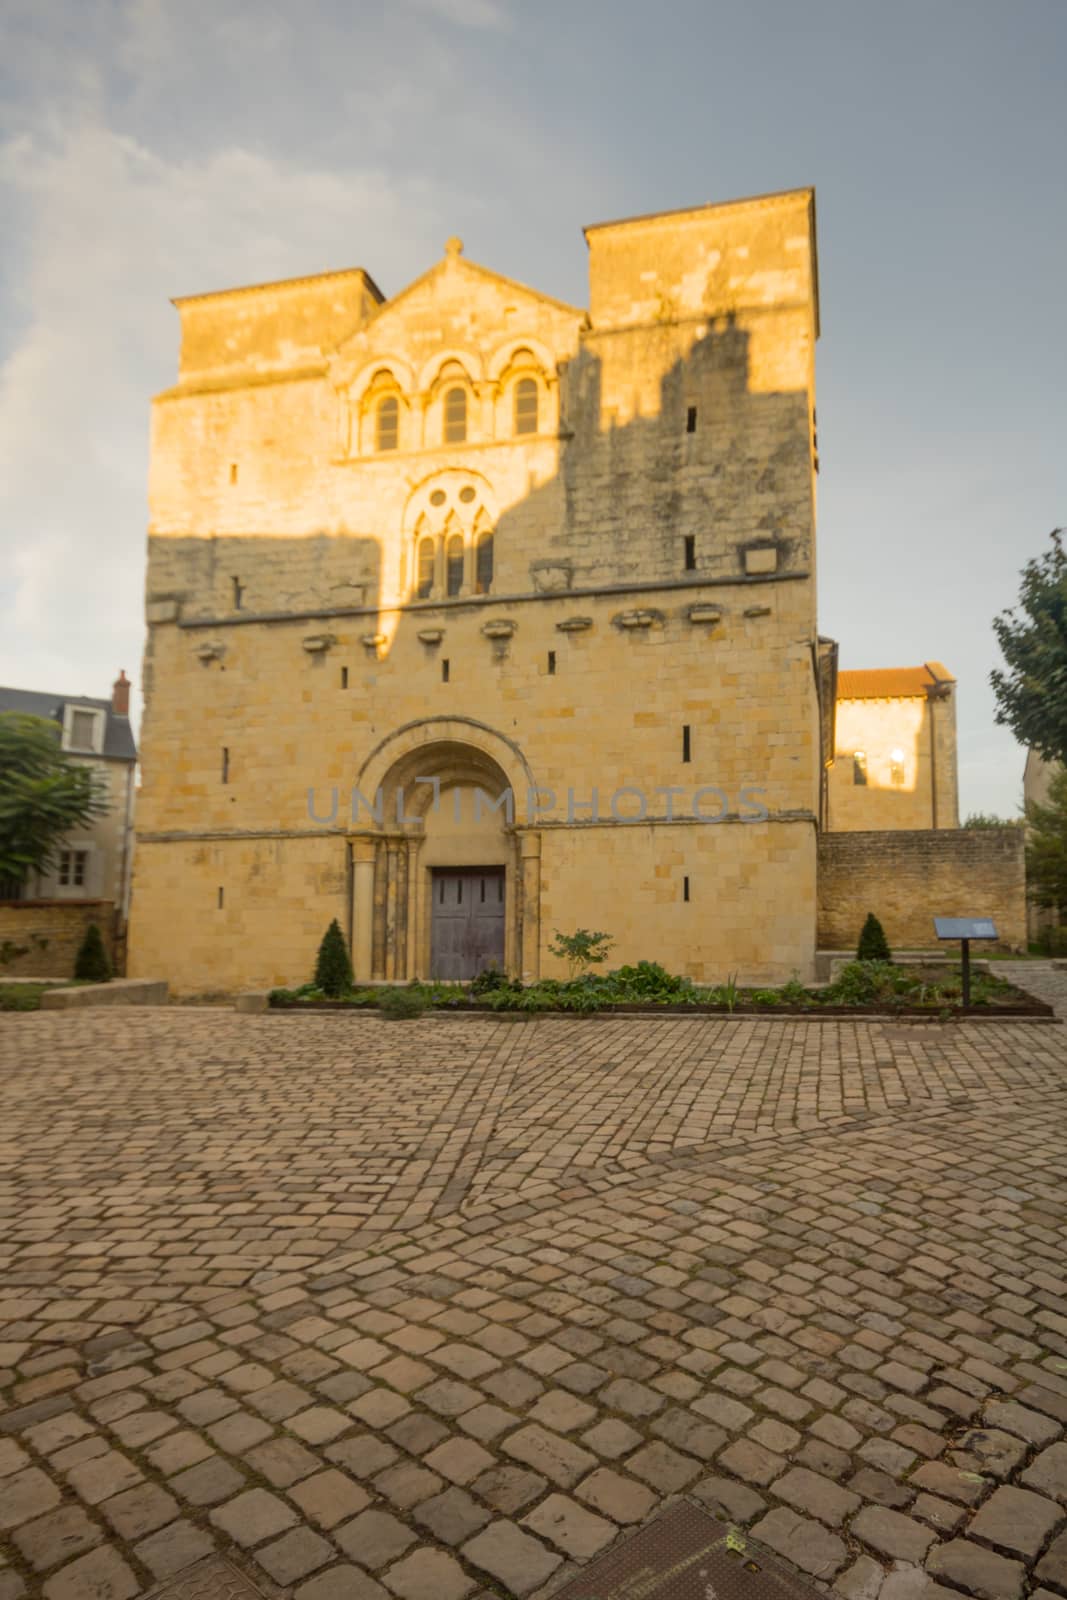 View of the Saint-Etienne church in Nevers, Burgundy, France